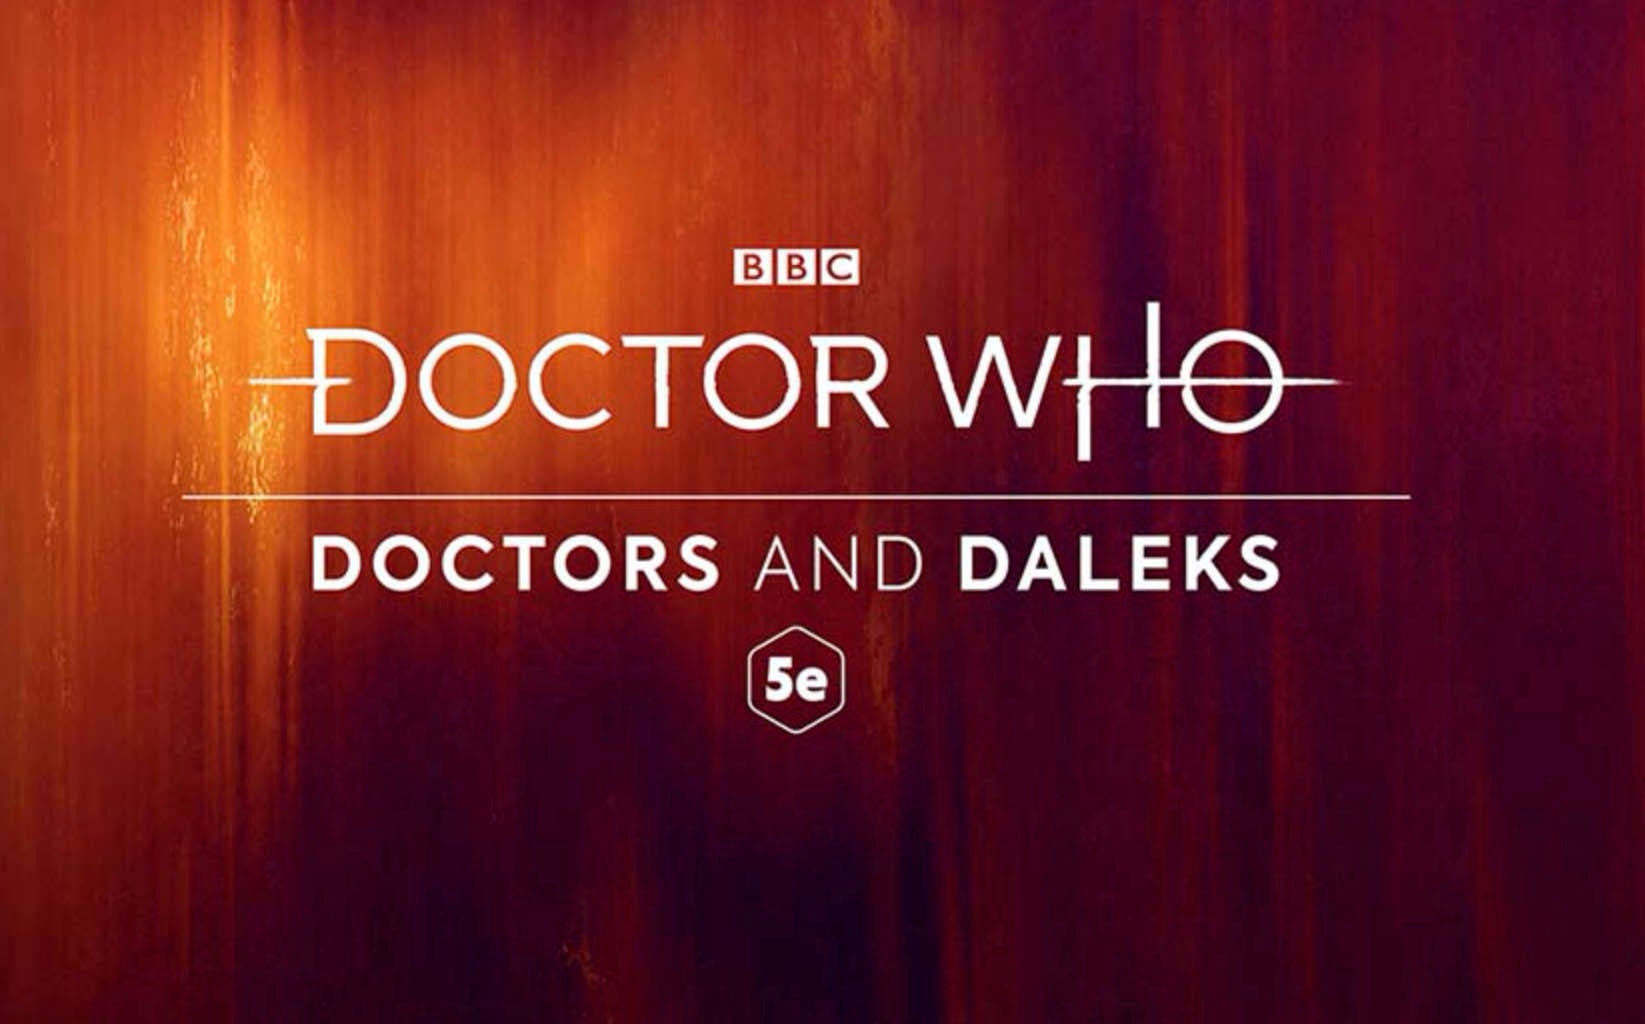 doctors-and-daleks-logo-small-1